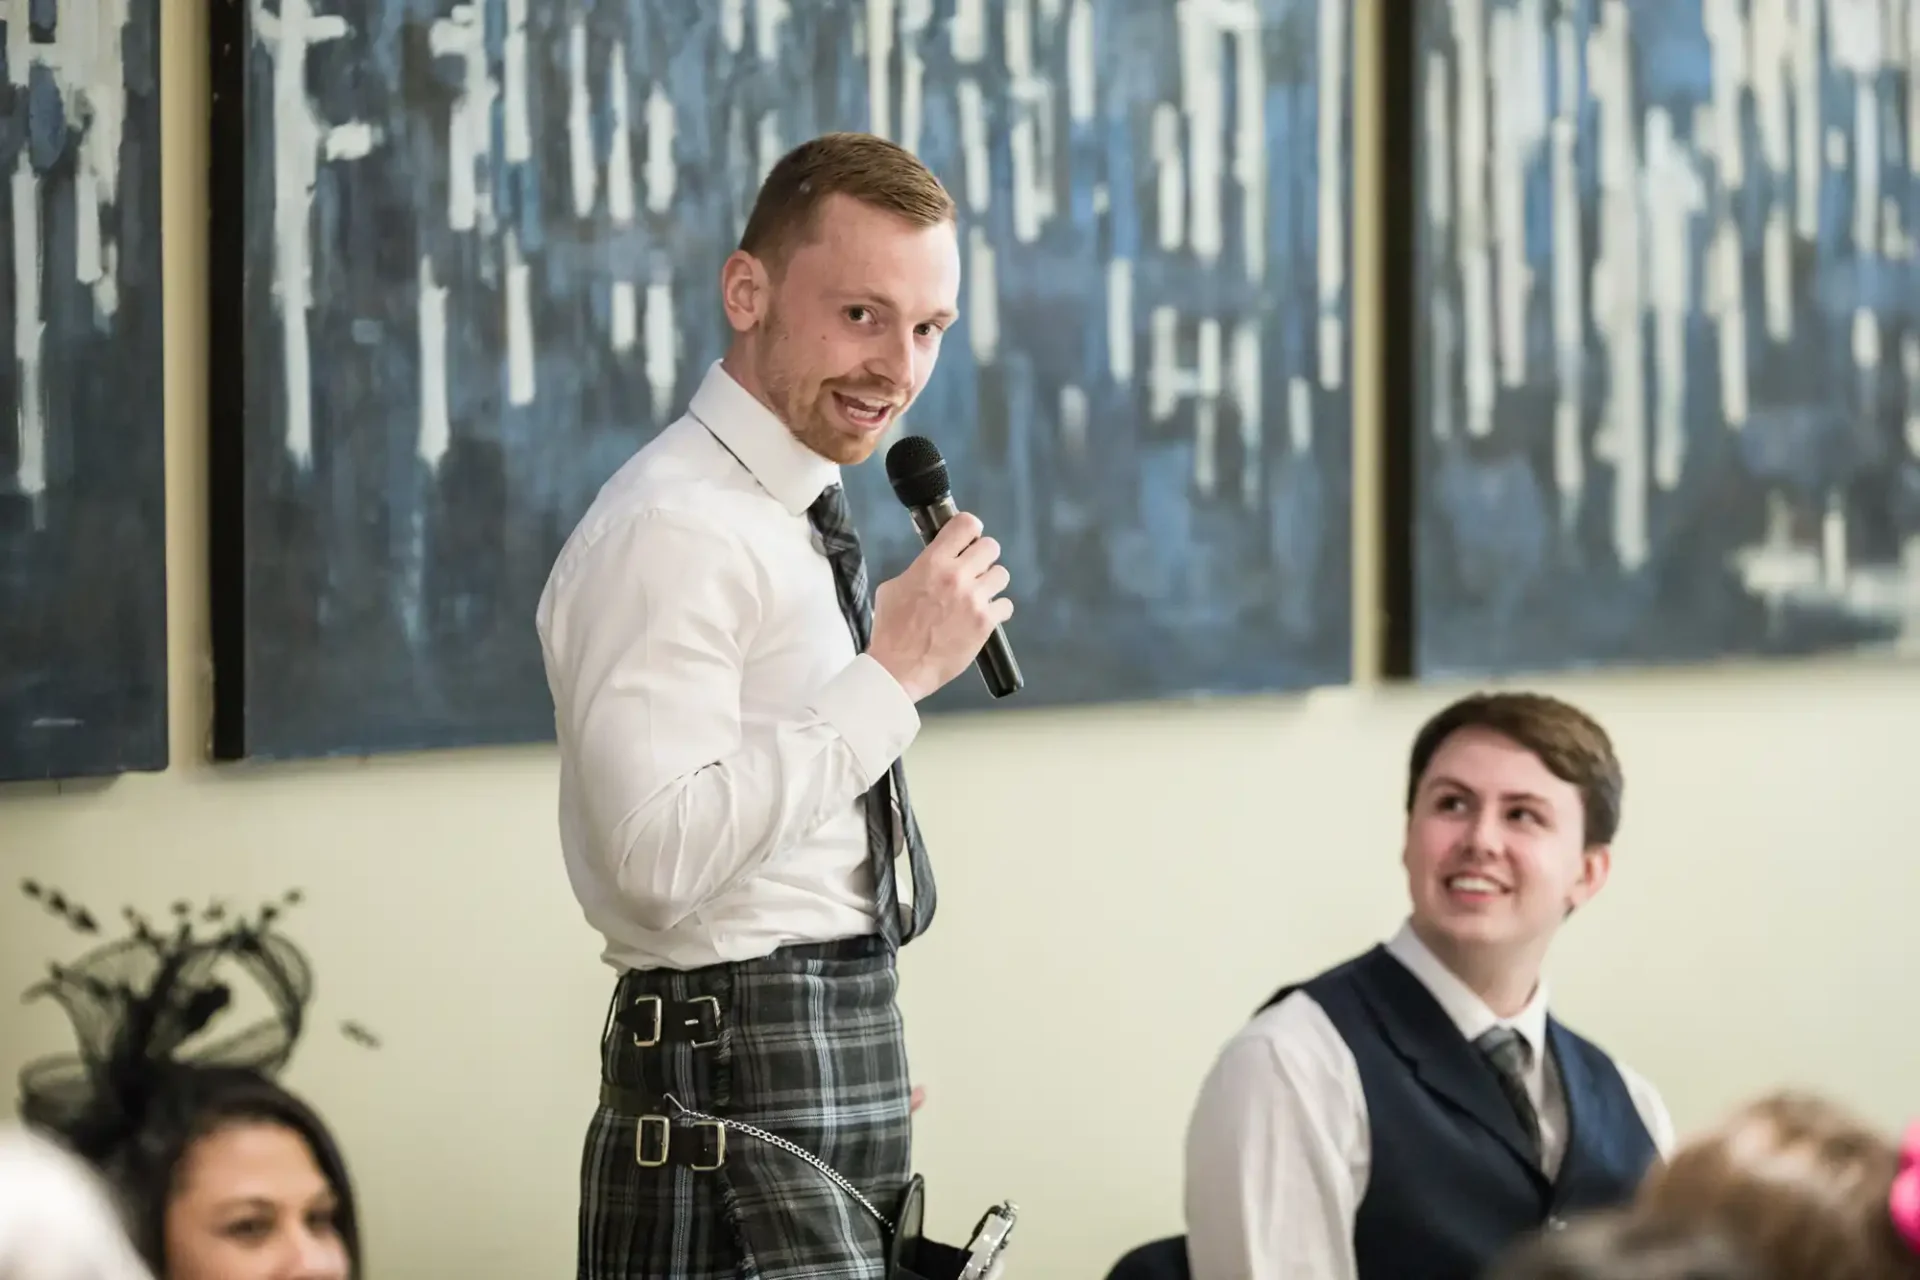 Man in a kilt and white shirt speaking into a microphone at an event, with another person smiling in the background.